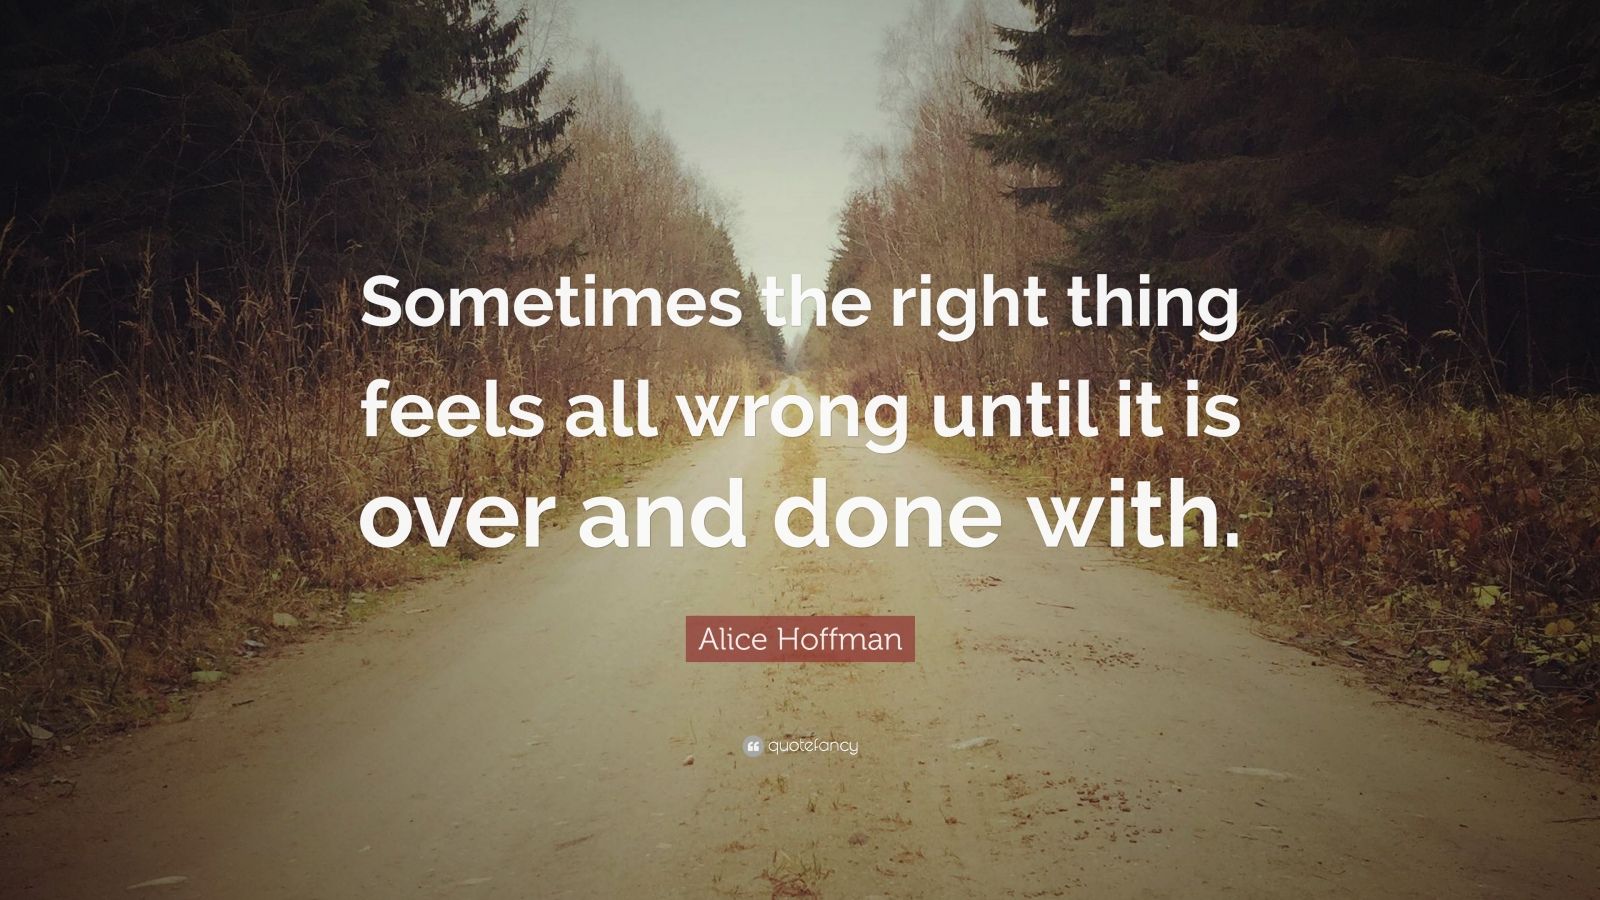 Alice Hoffman Quote: “Sometimes the right thing feels all wrong until ...